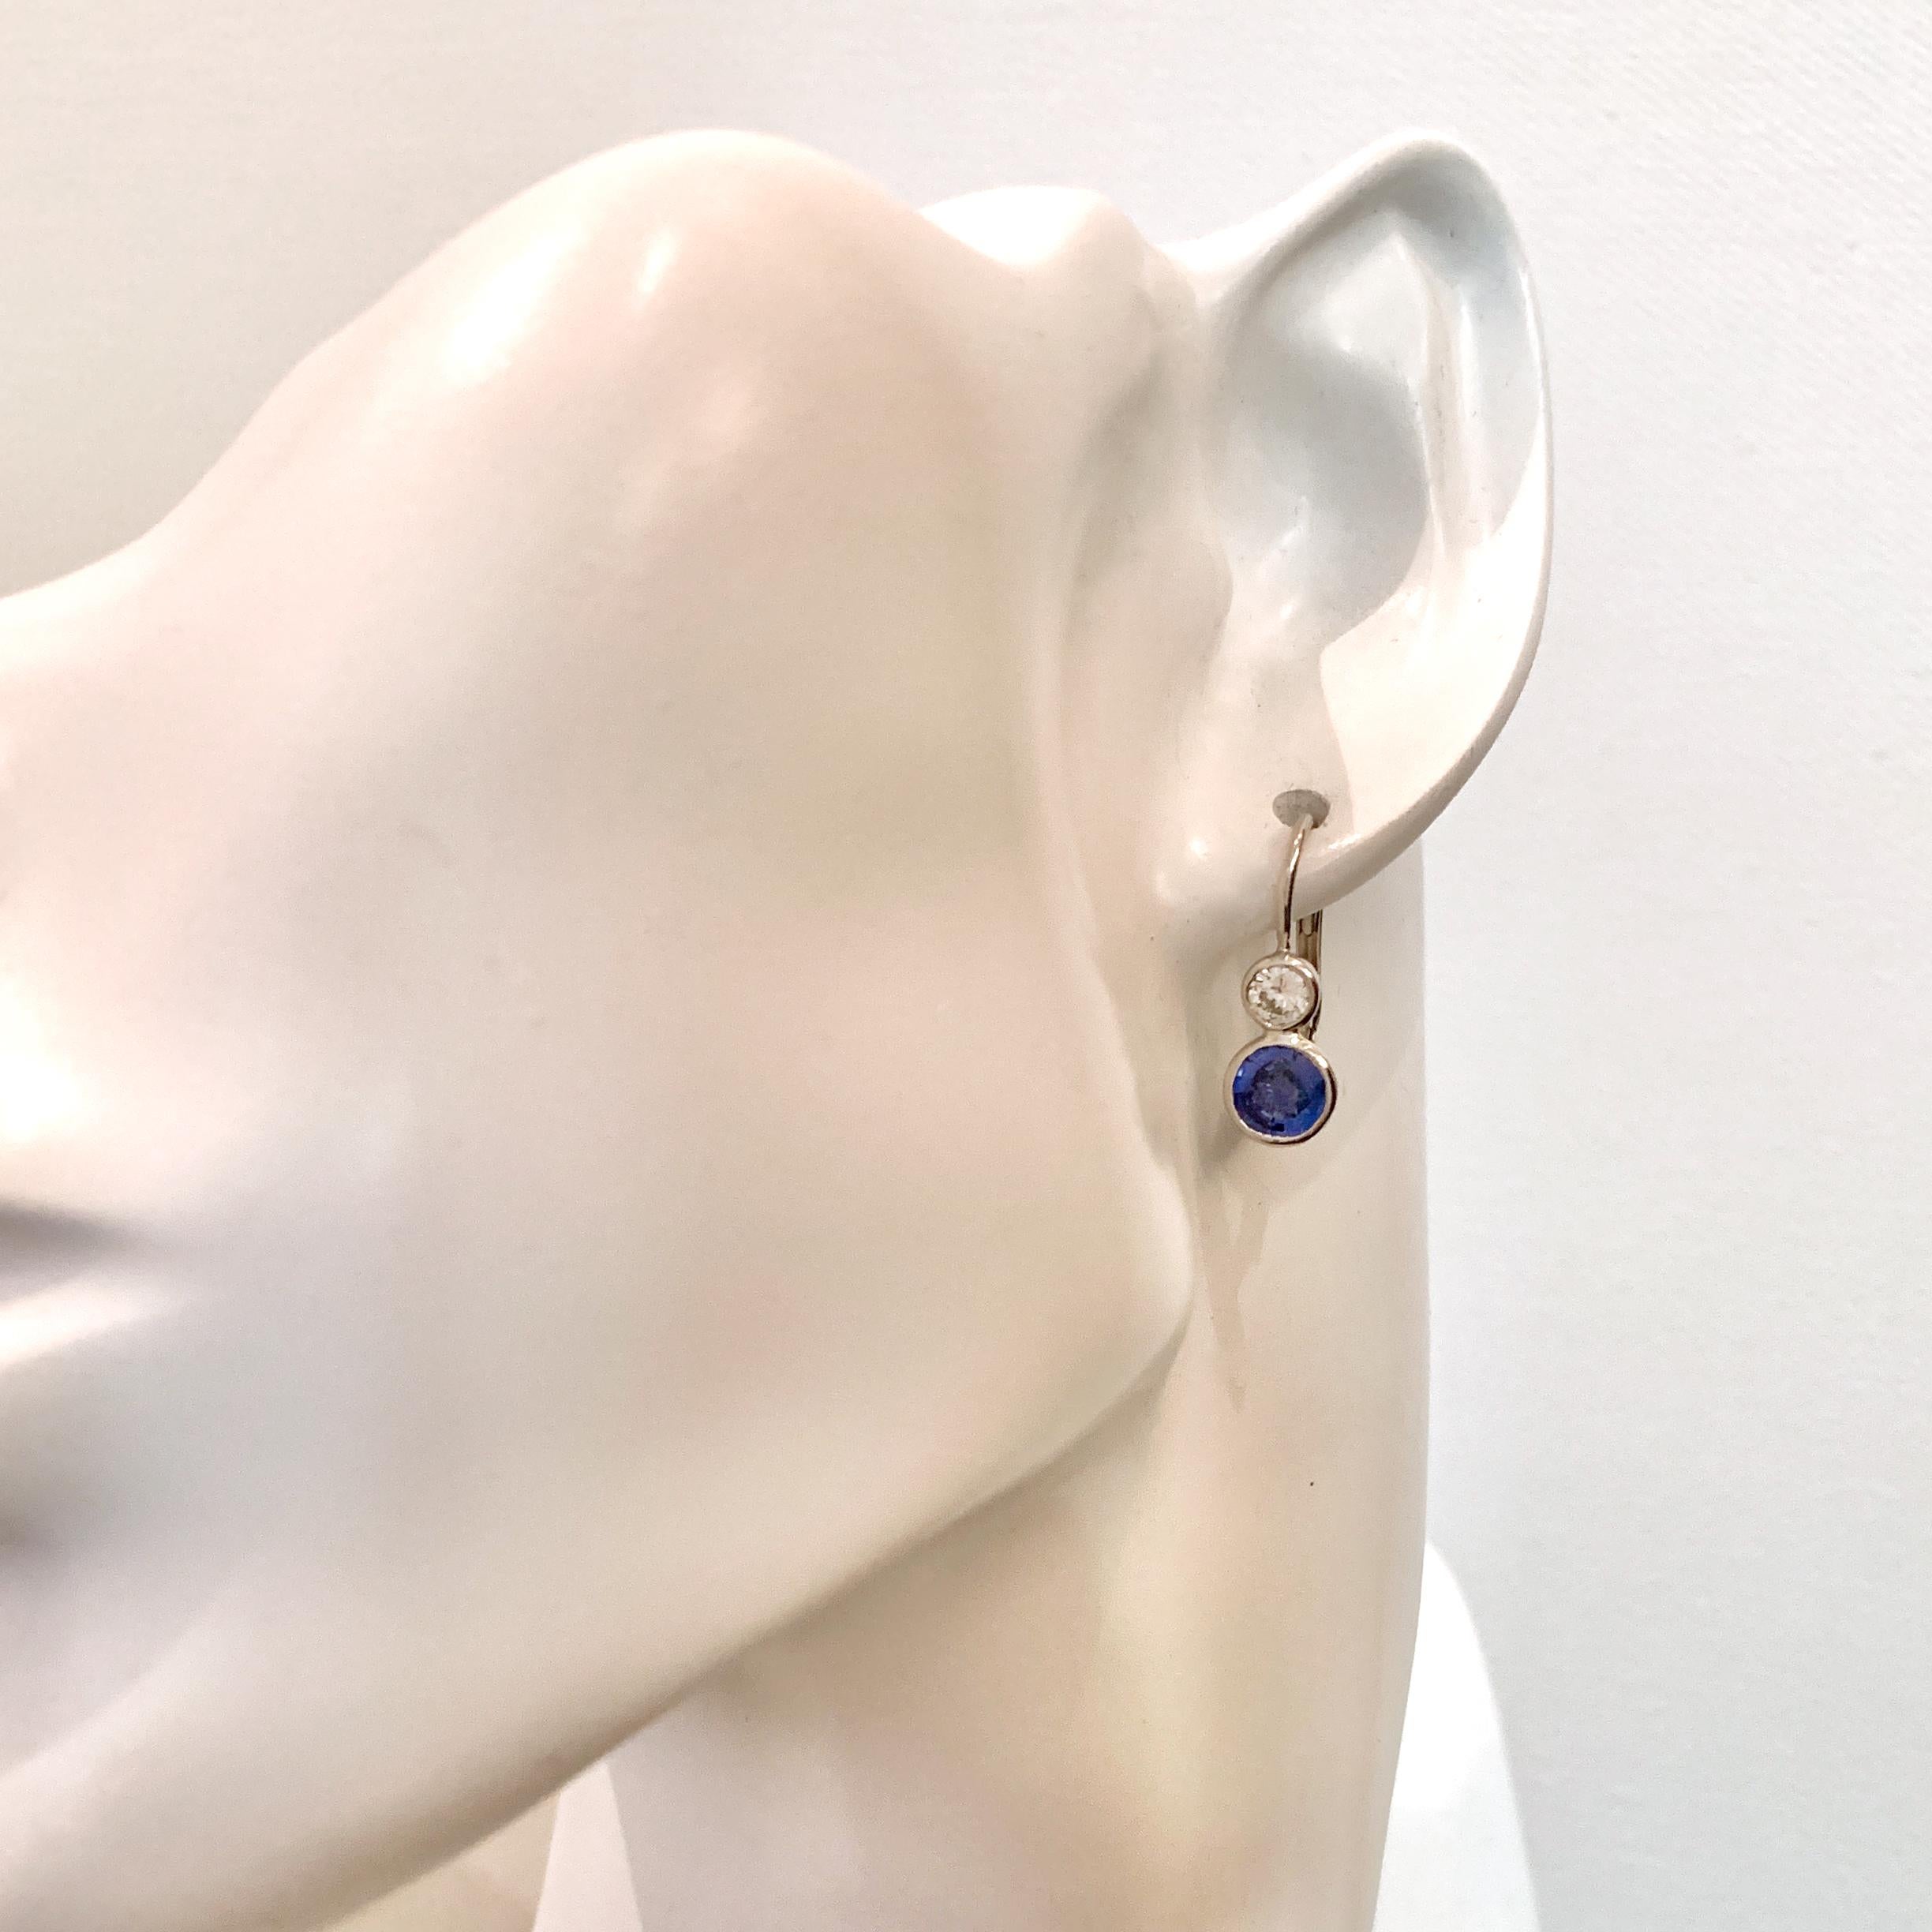 Simple and elegant, these 14 karat white gold drop earrings were handcrafted in 2020 by Eytan Brandes to show off a pair of cornflower blue Ceylon sapphires.

The mixed cut sapphires are 0.65 carats each and have not been treated, other than